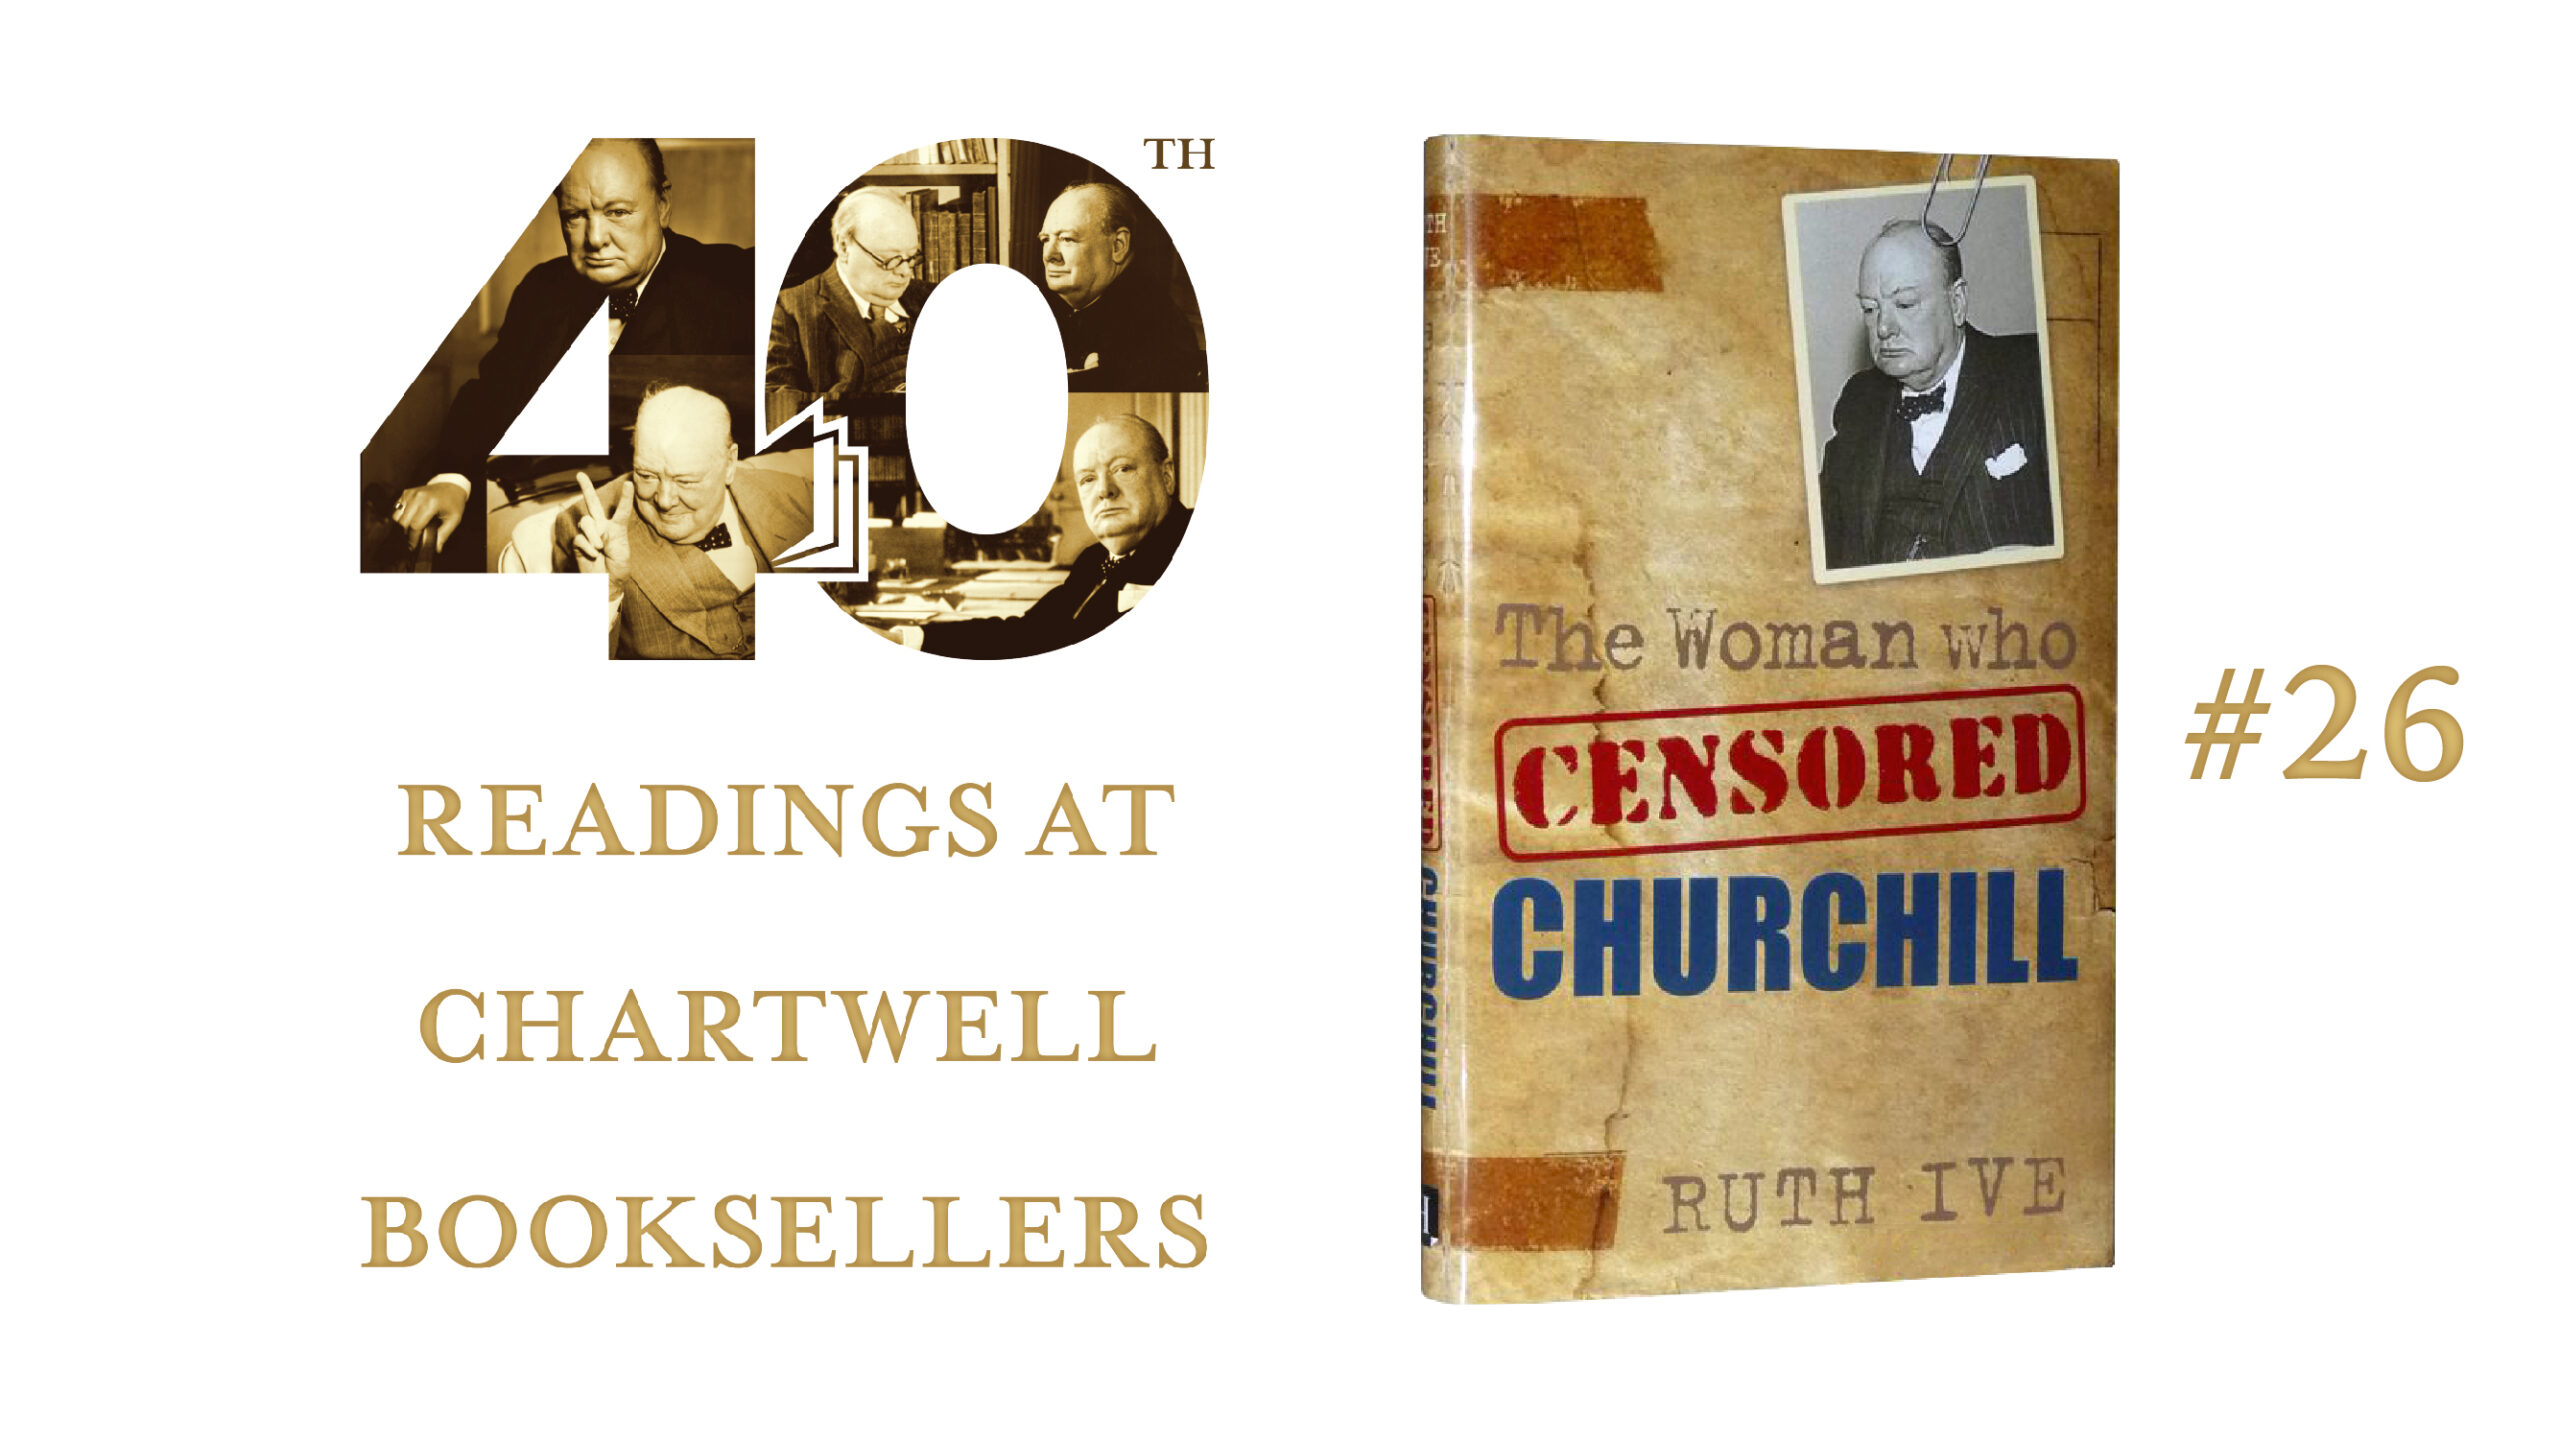 WATCH MARY TESTA READ “THE WOMAN WHO CENSORED CHURCHILL” BY RUTH IVE